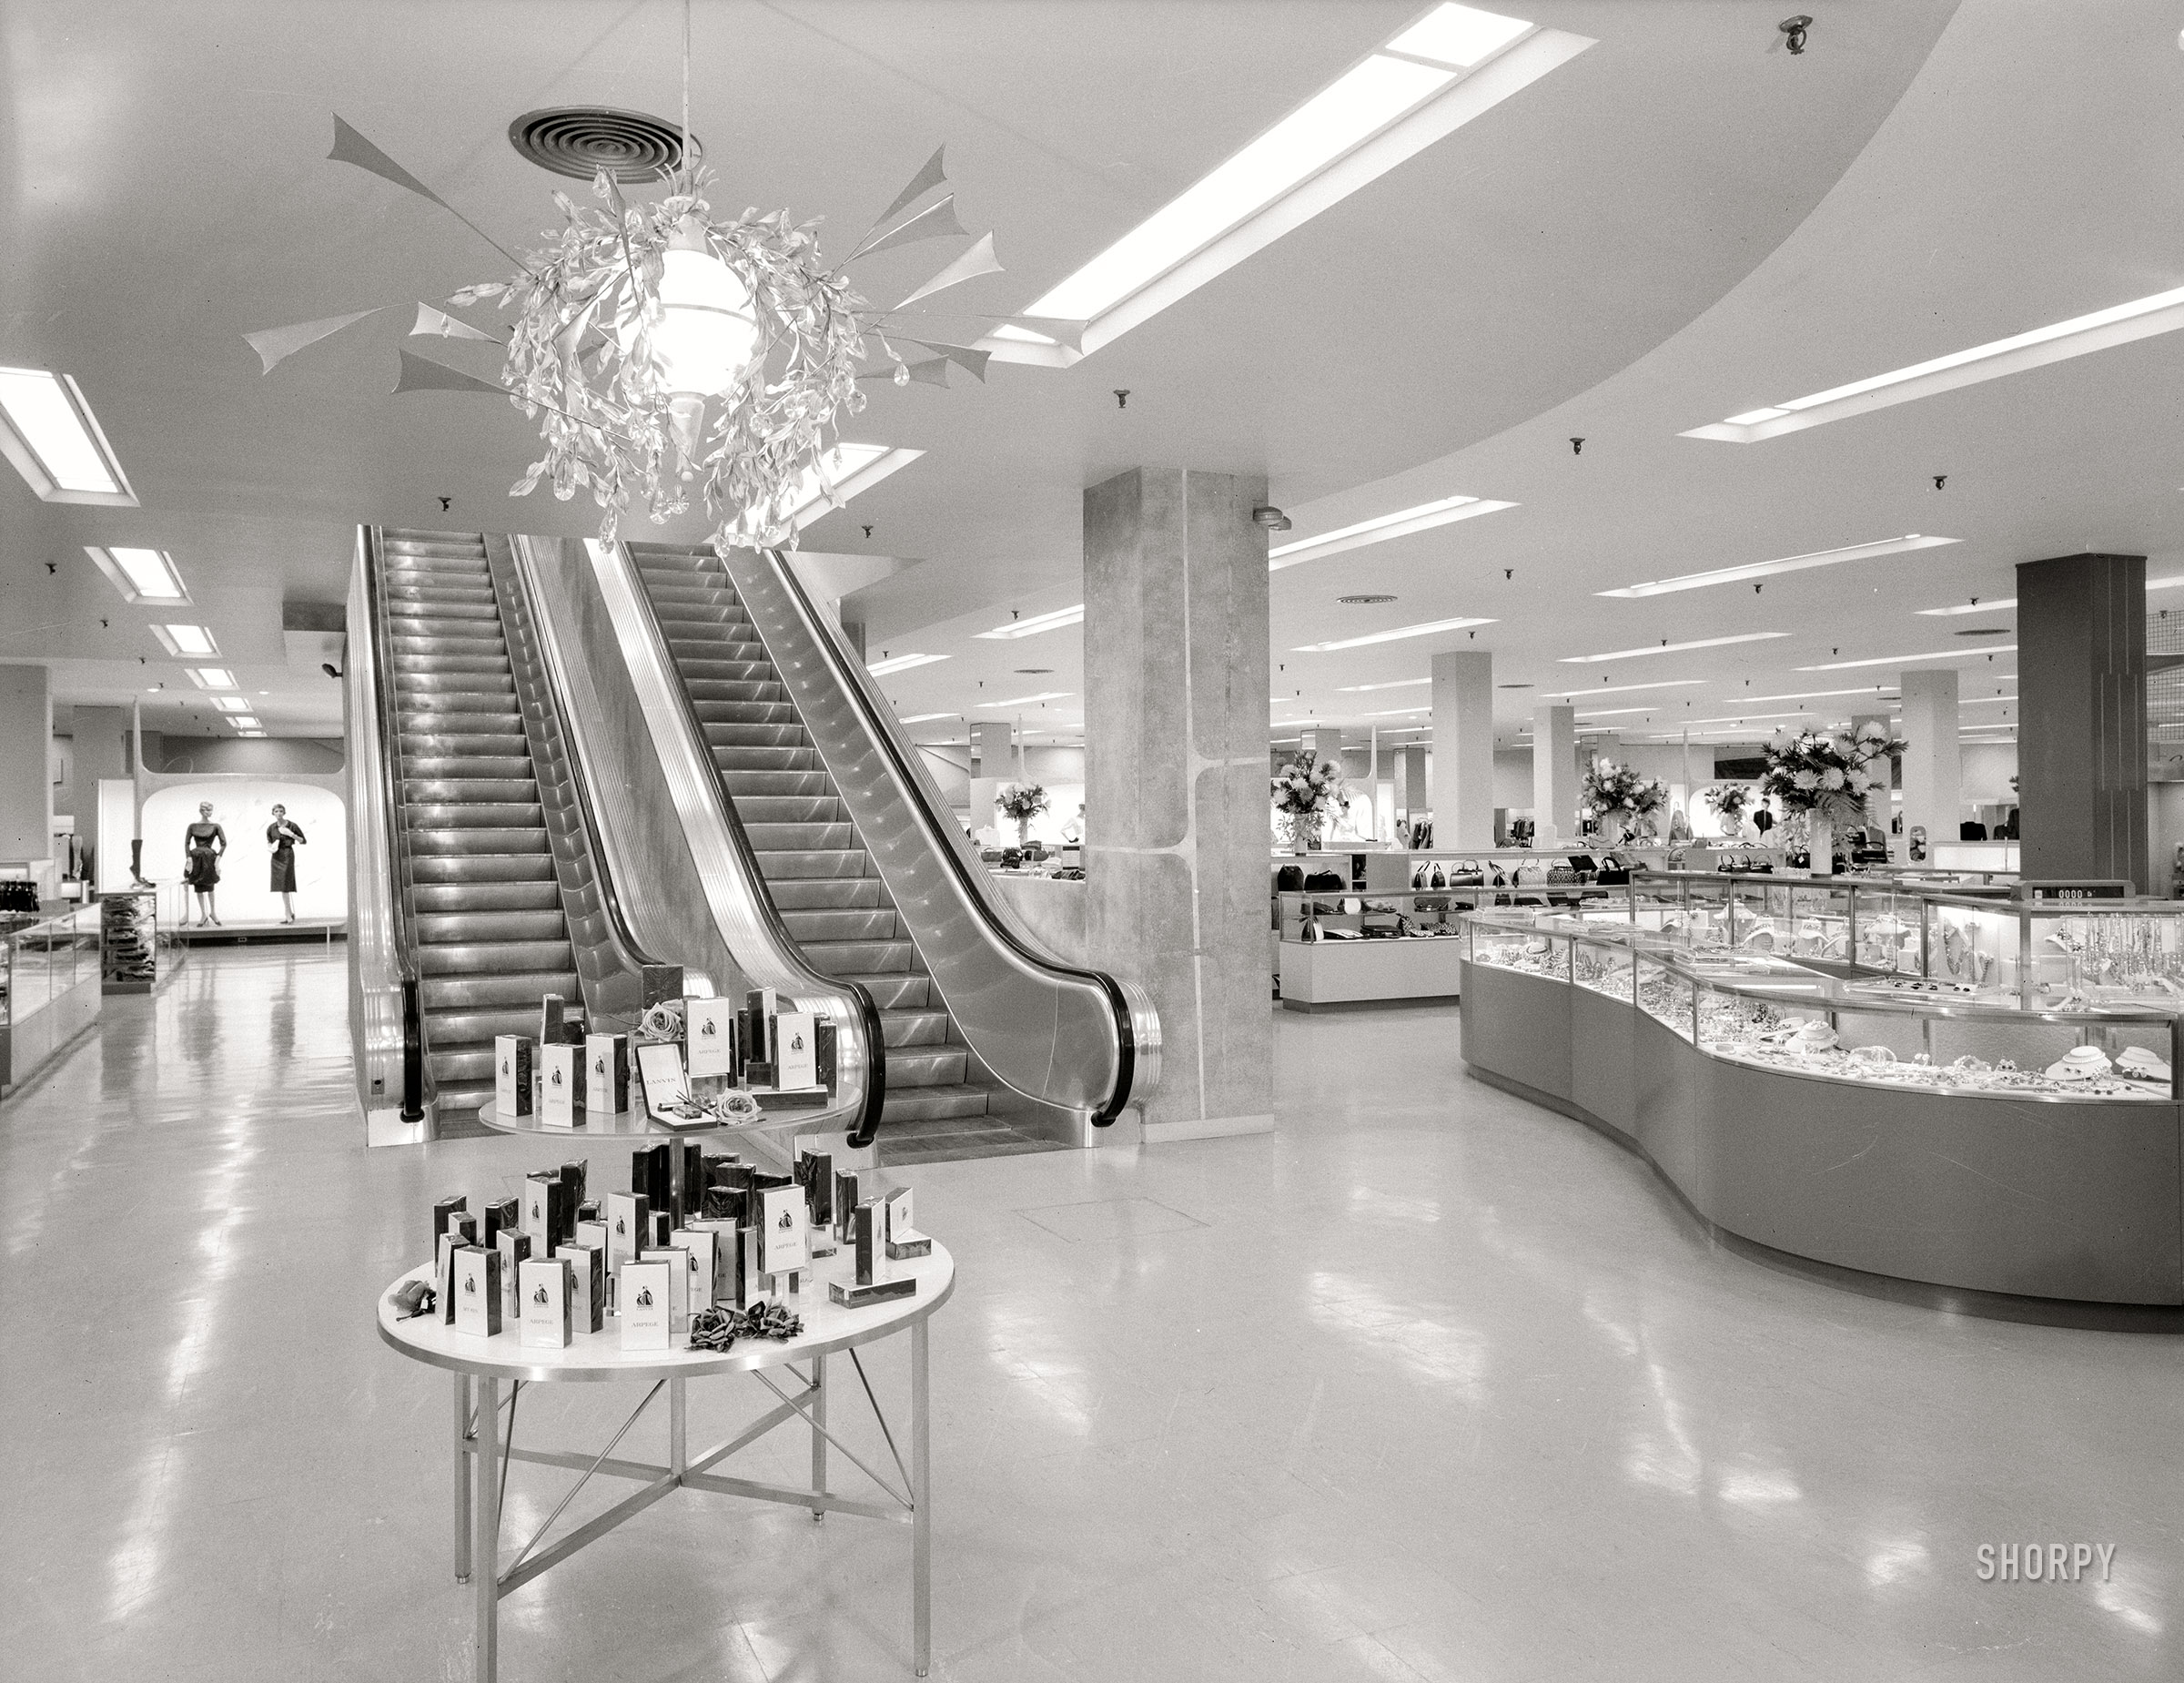 October 23, 1959. "Bloomingdale's, Hackensack, New Jersey. Escalators. Raymond Loewy, client." 4x5 inch acetate negative by Gottscho-Schleisner. View full size.